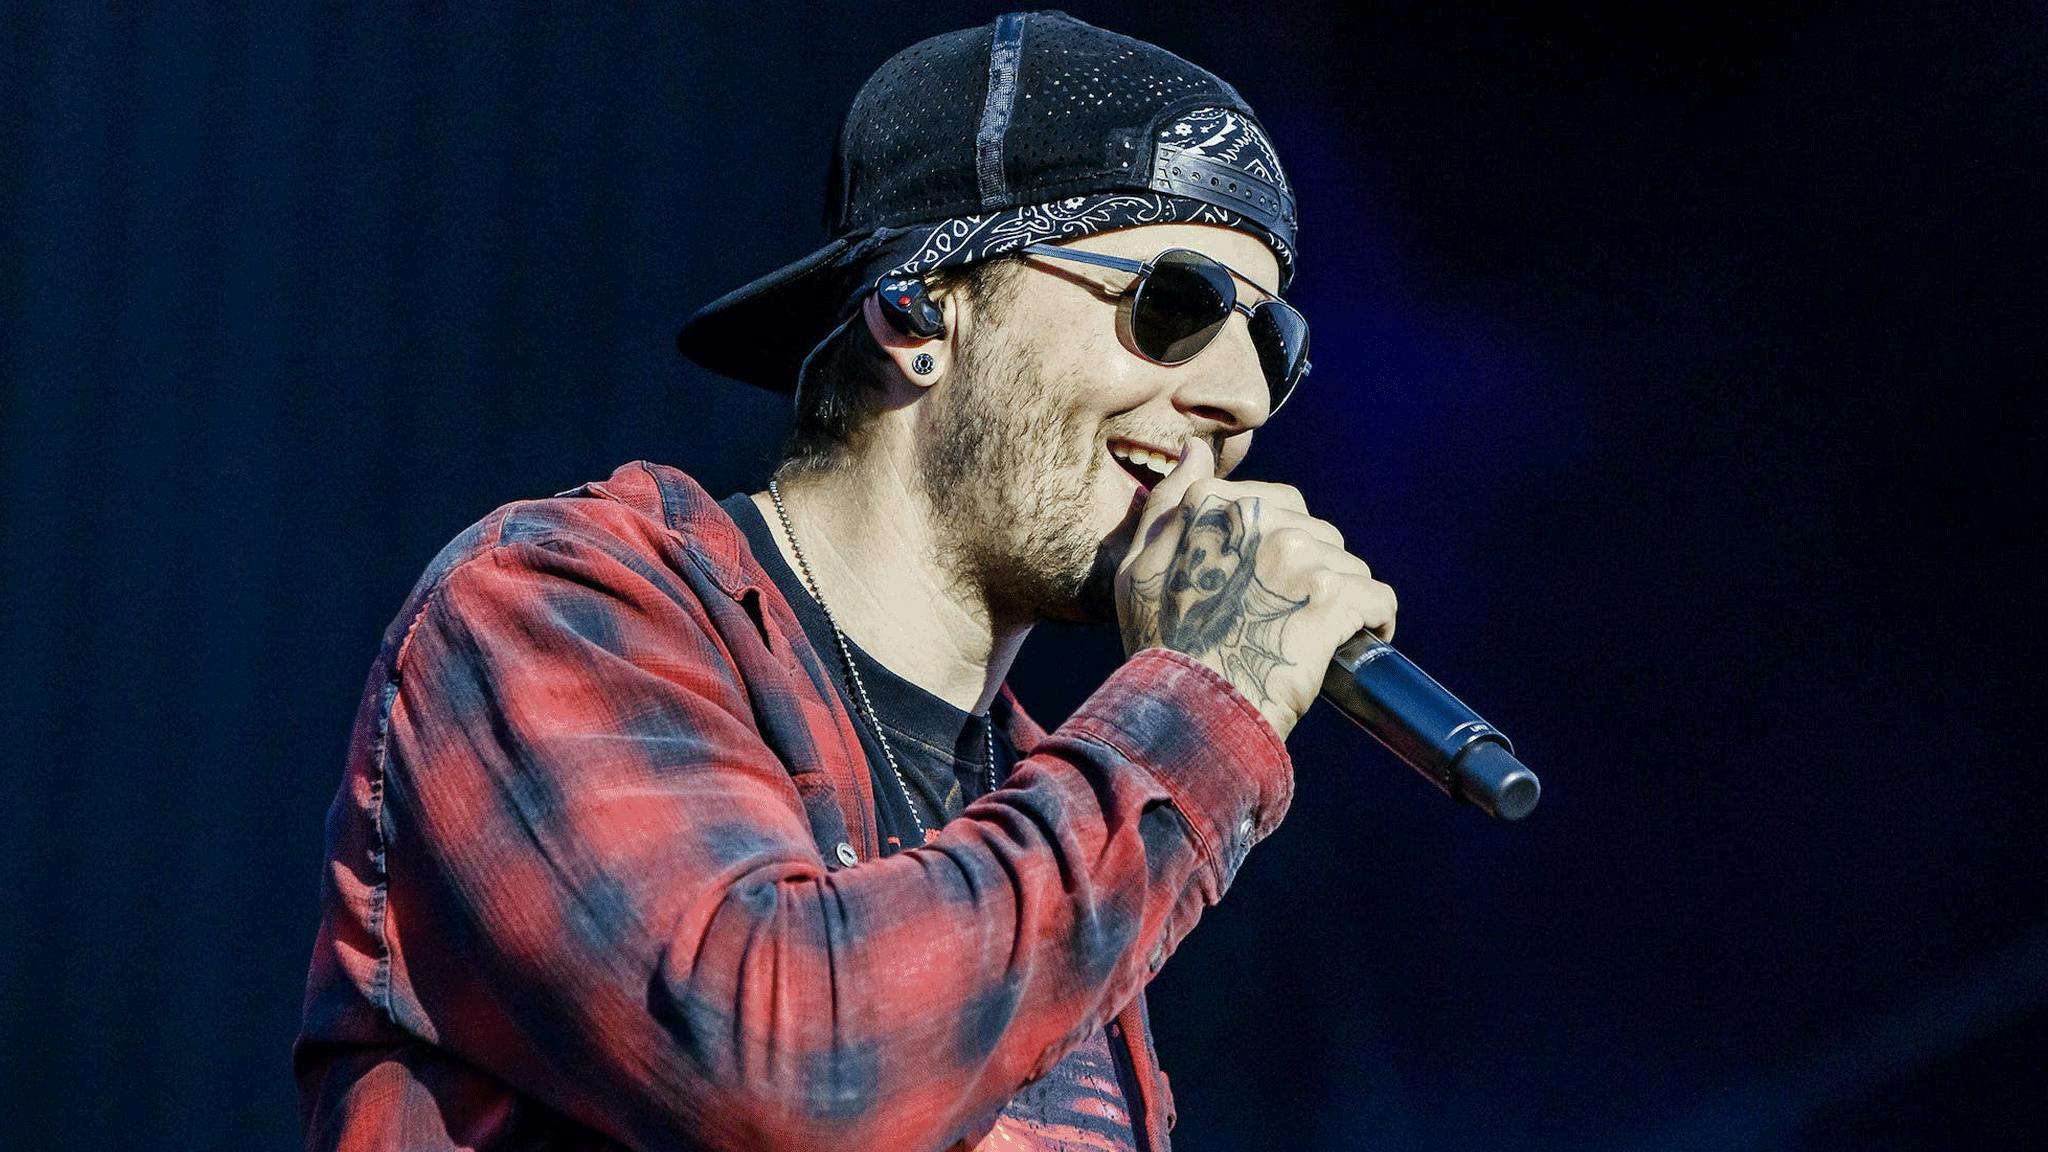 M. Shadows on Avenged Sevenfold’s next album: “There’s something vastly different in the works”